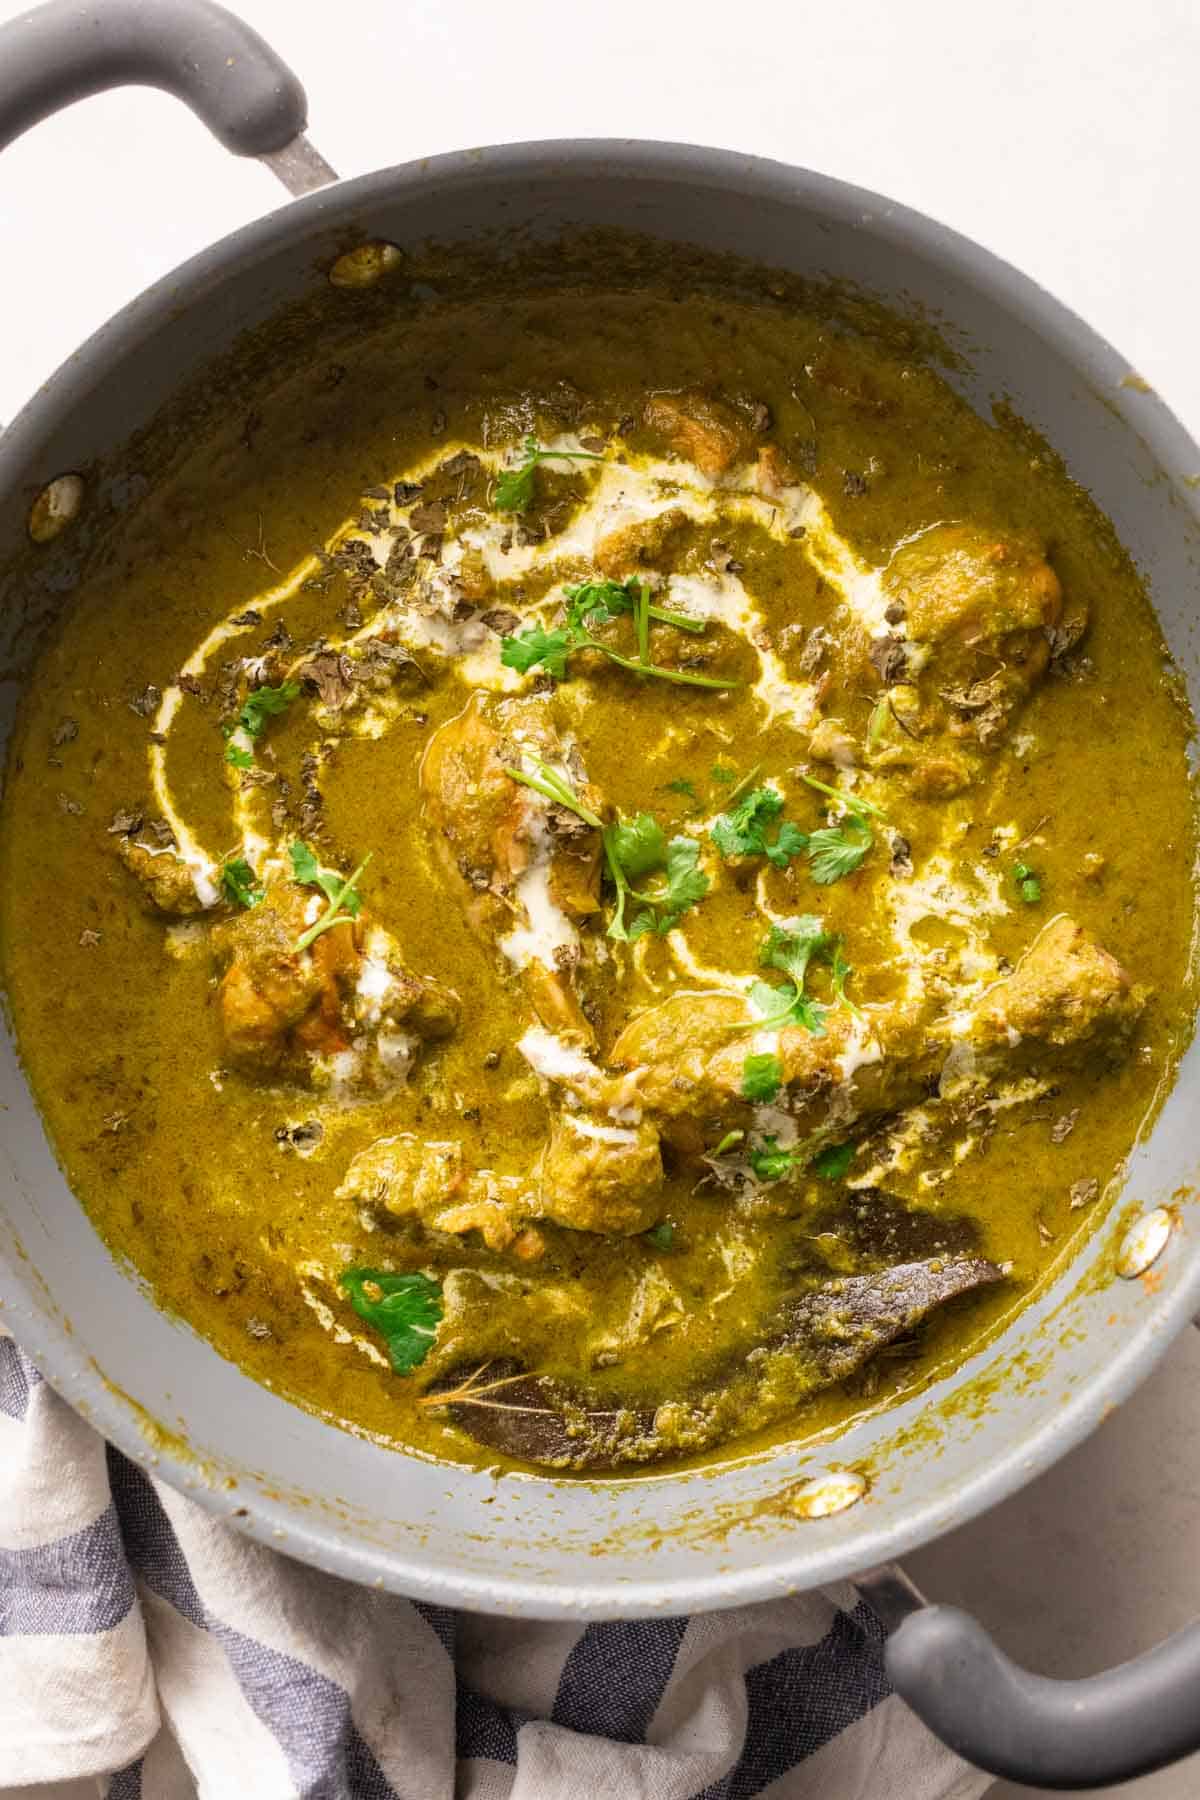 Picture of saag chicken served in the pan that it was cooked in